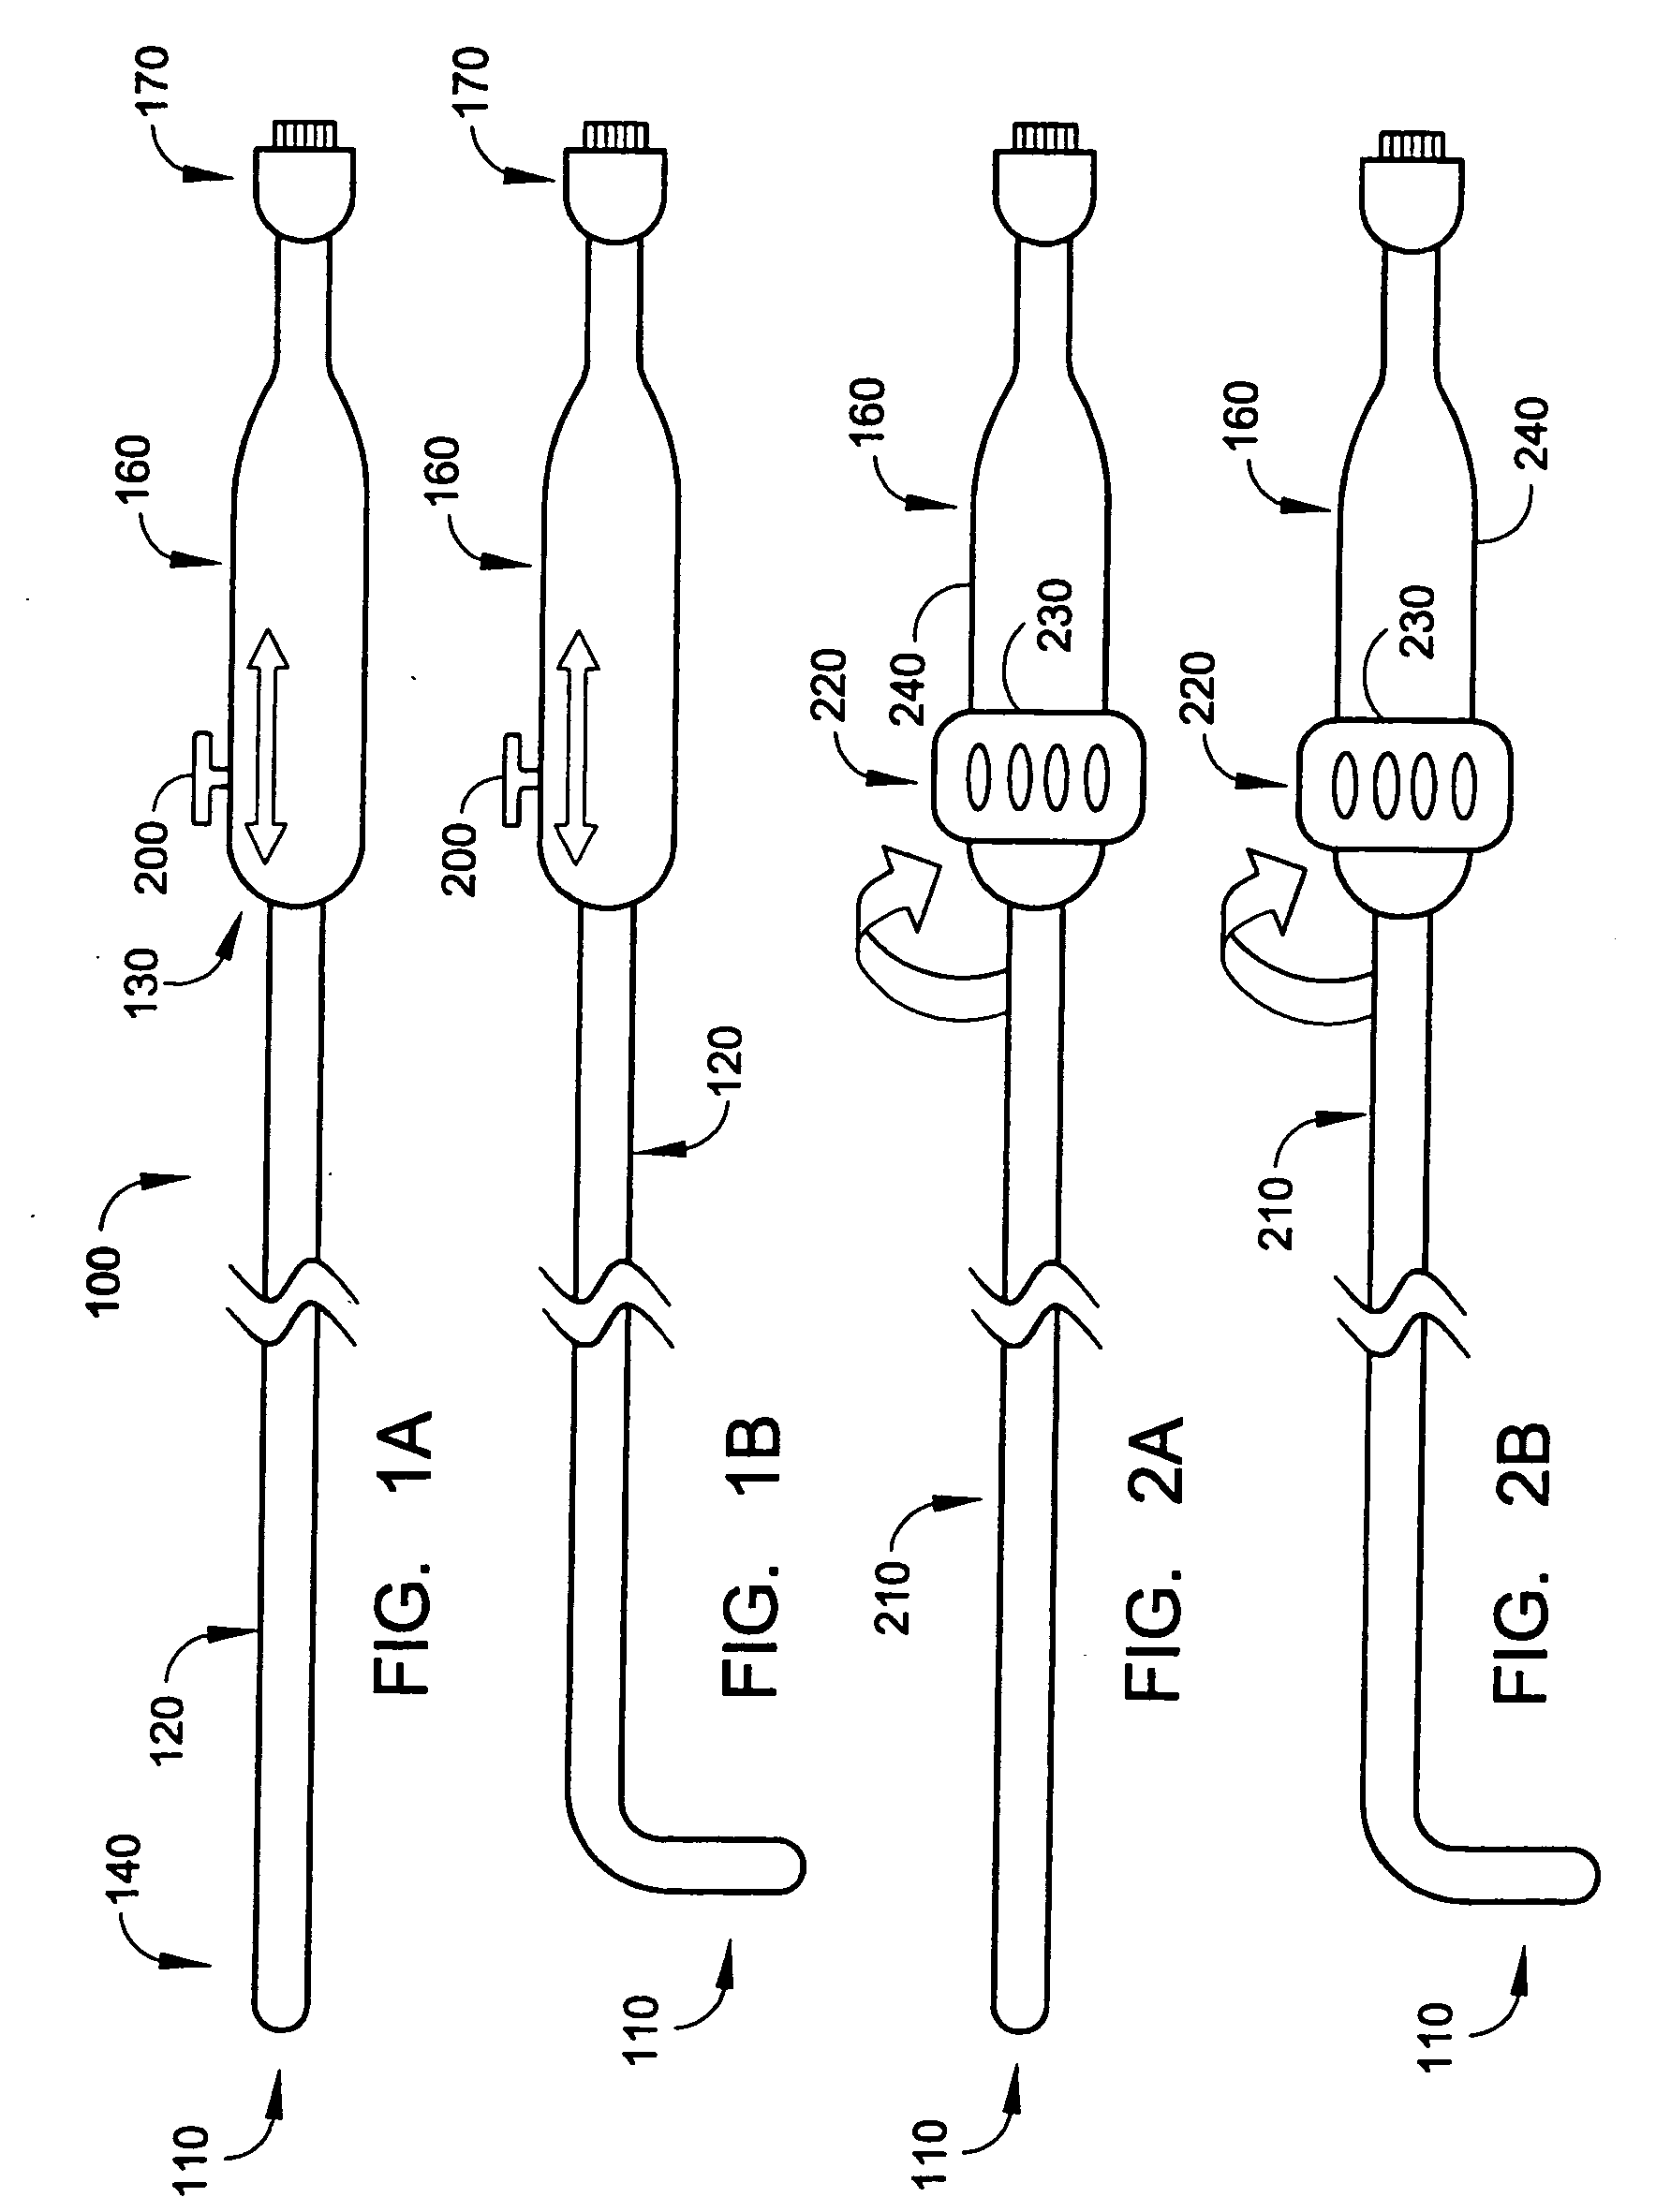 Radio-frequency based catheter system and method for ablating biological tissues